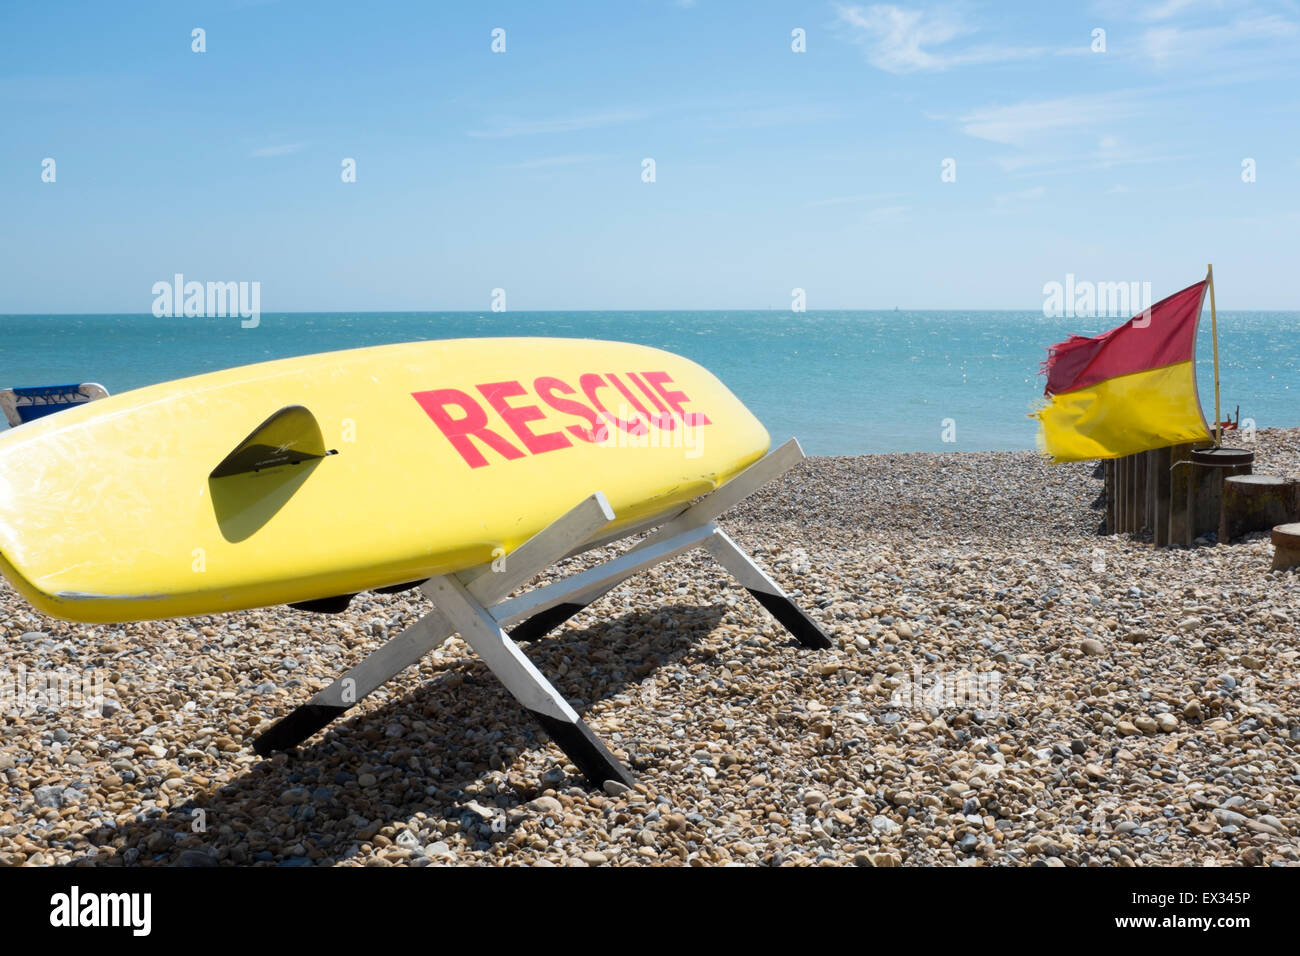 Lifeguard's surfboard at lifeguard station, on the beach at Eastbourne, England Stock Photo